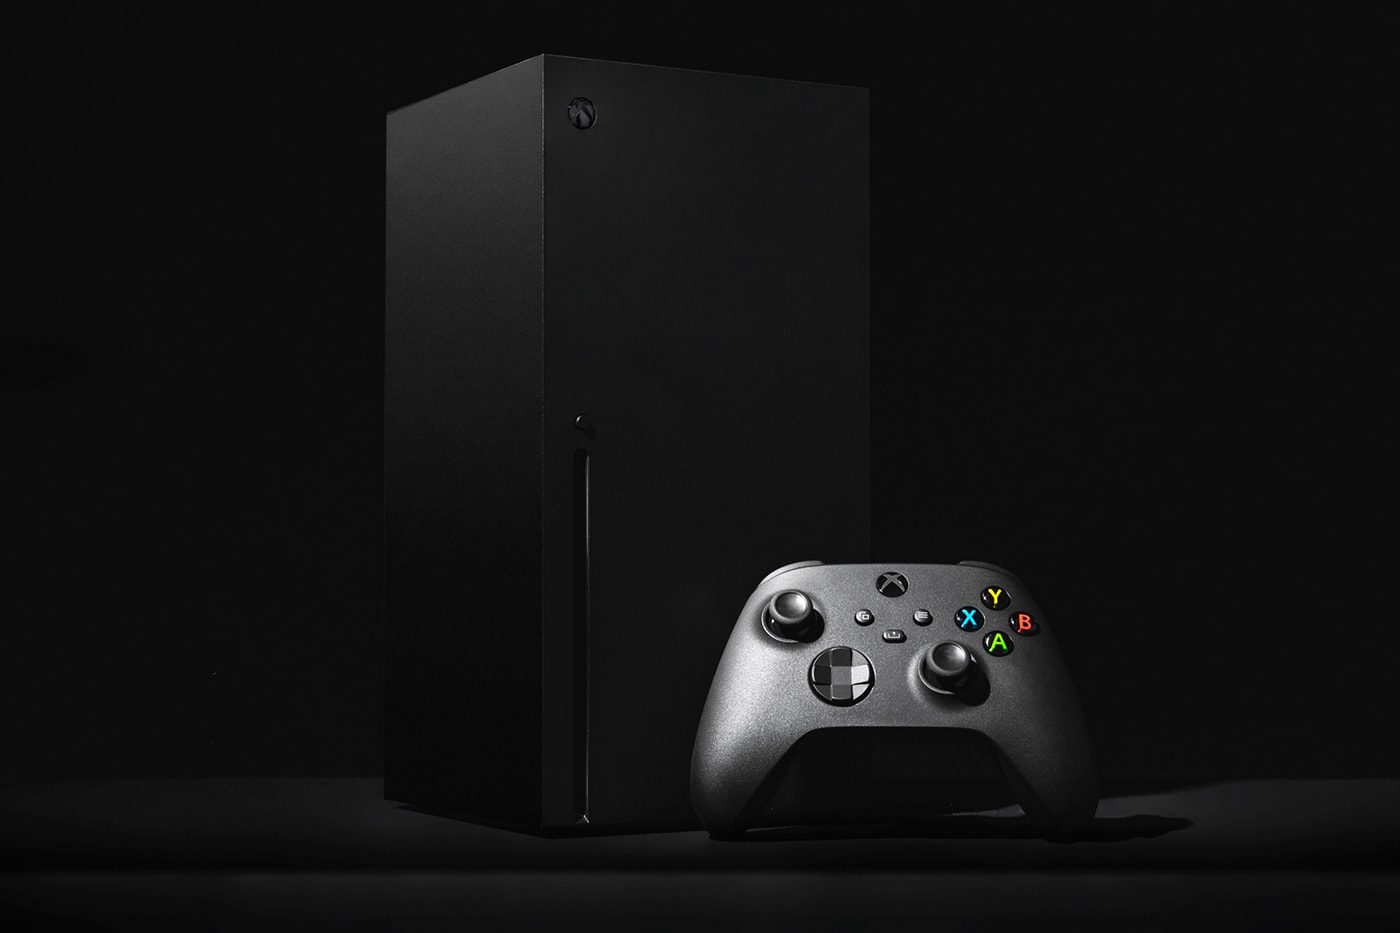 Want a Limited-Edition Porsche Xbox Series X Console? Good Luck